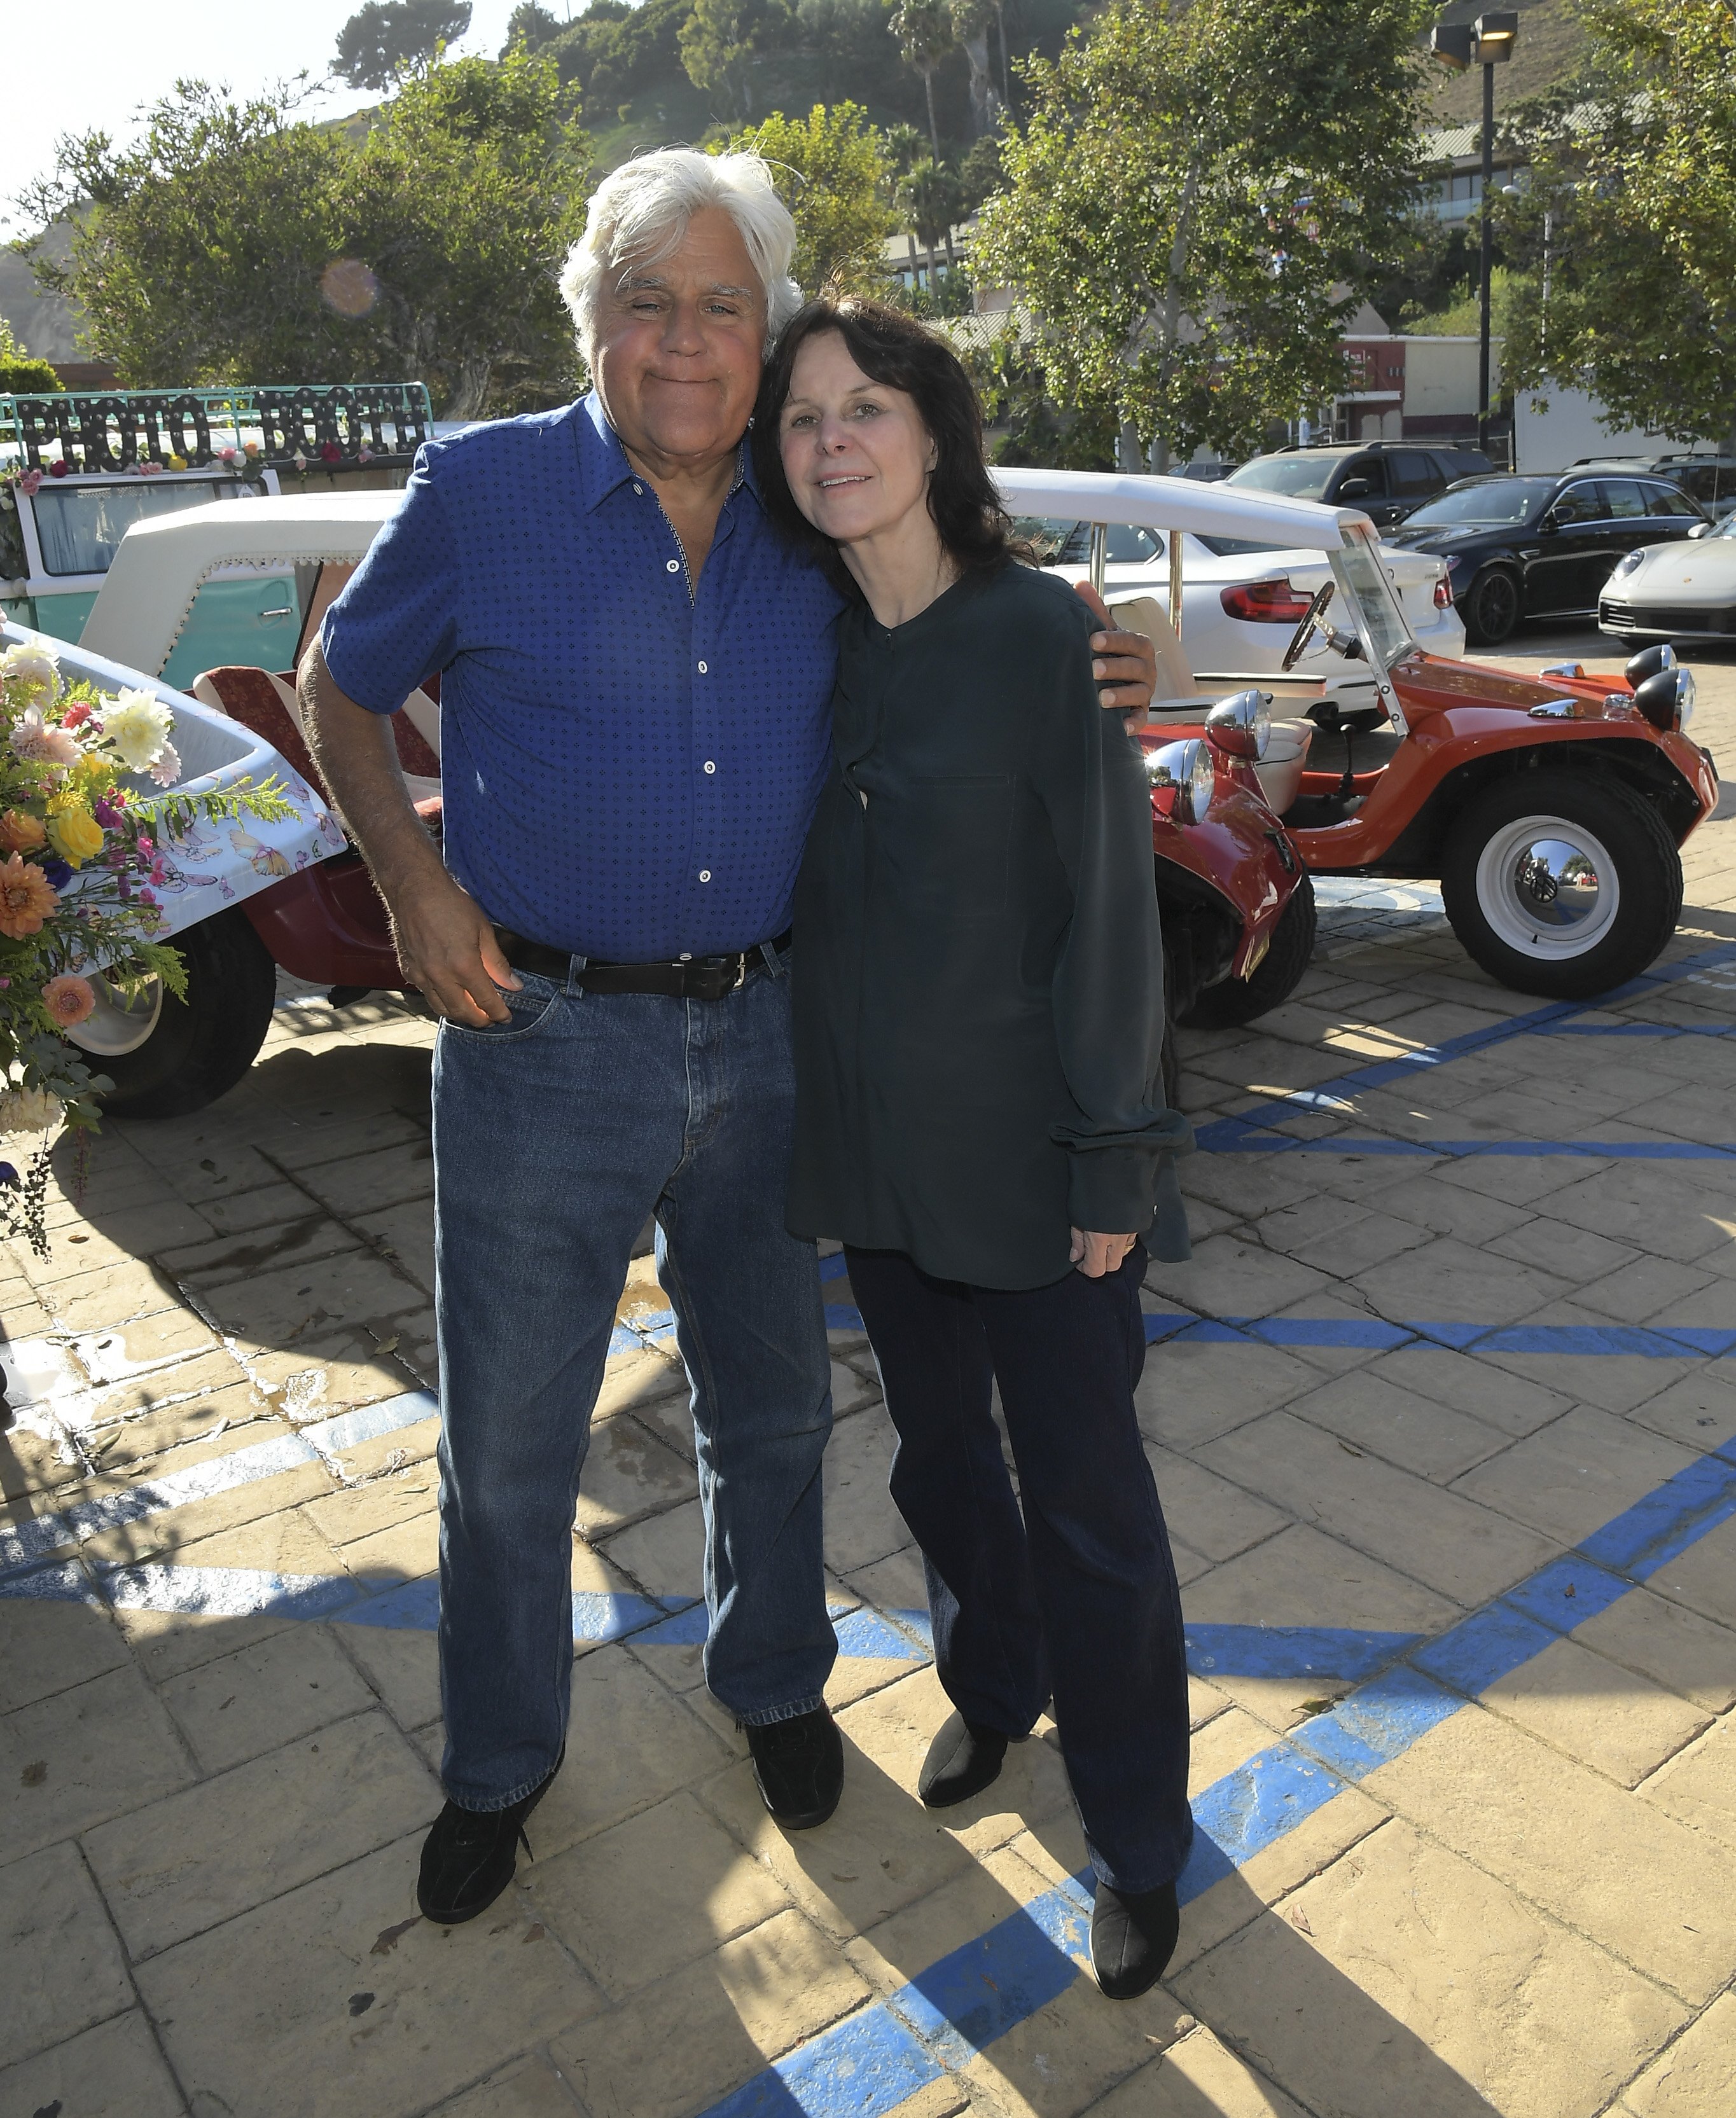 Jay and Mavis Leno at the private unveiling of the Meyers Manx electric automobile on August 8, 2022, in Malibu, California | Source: Getty Images